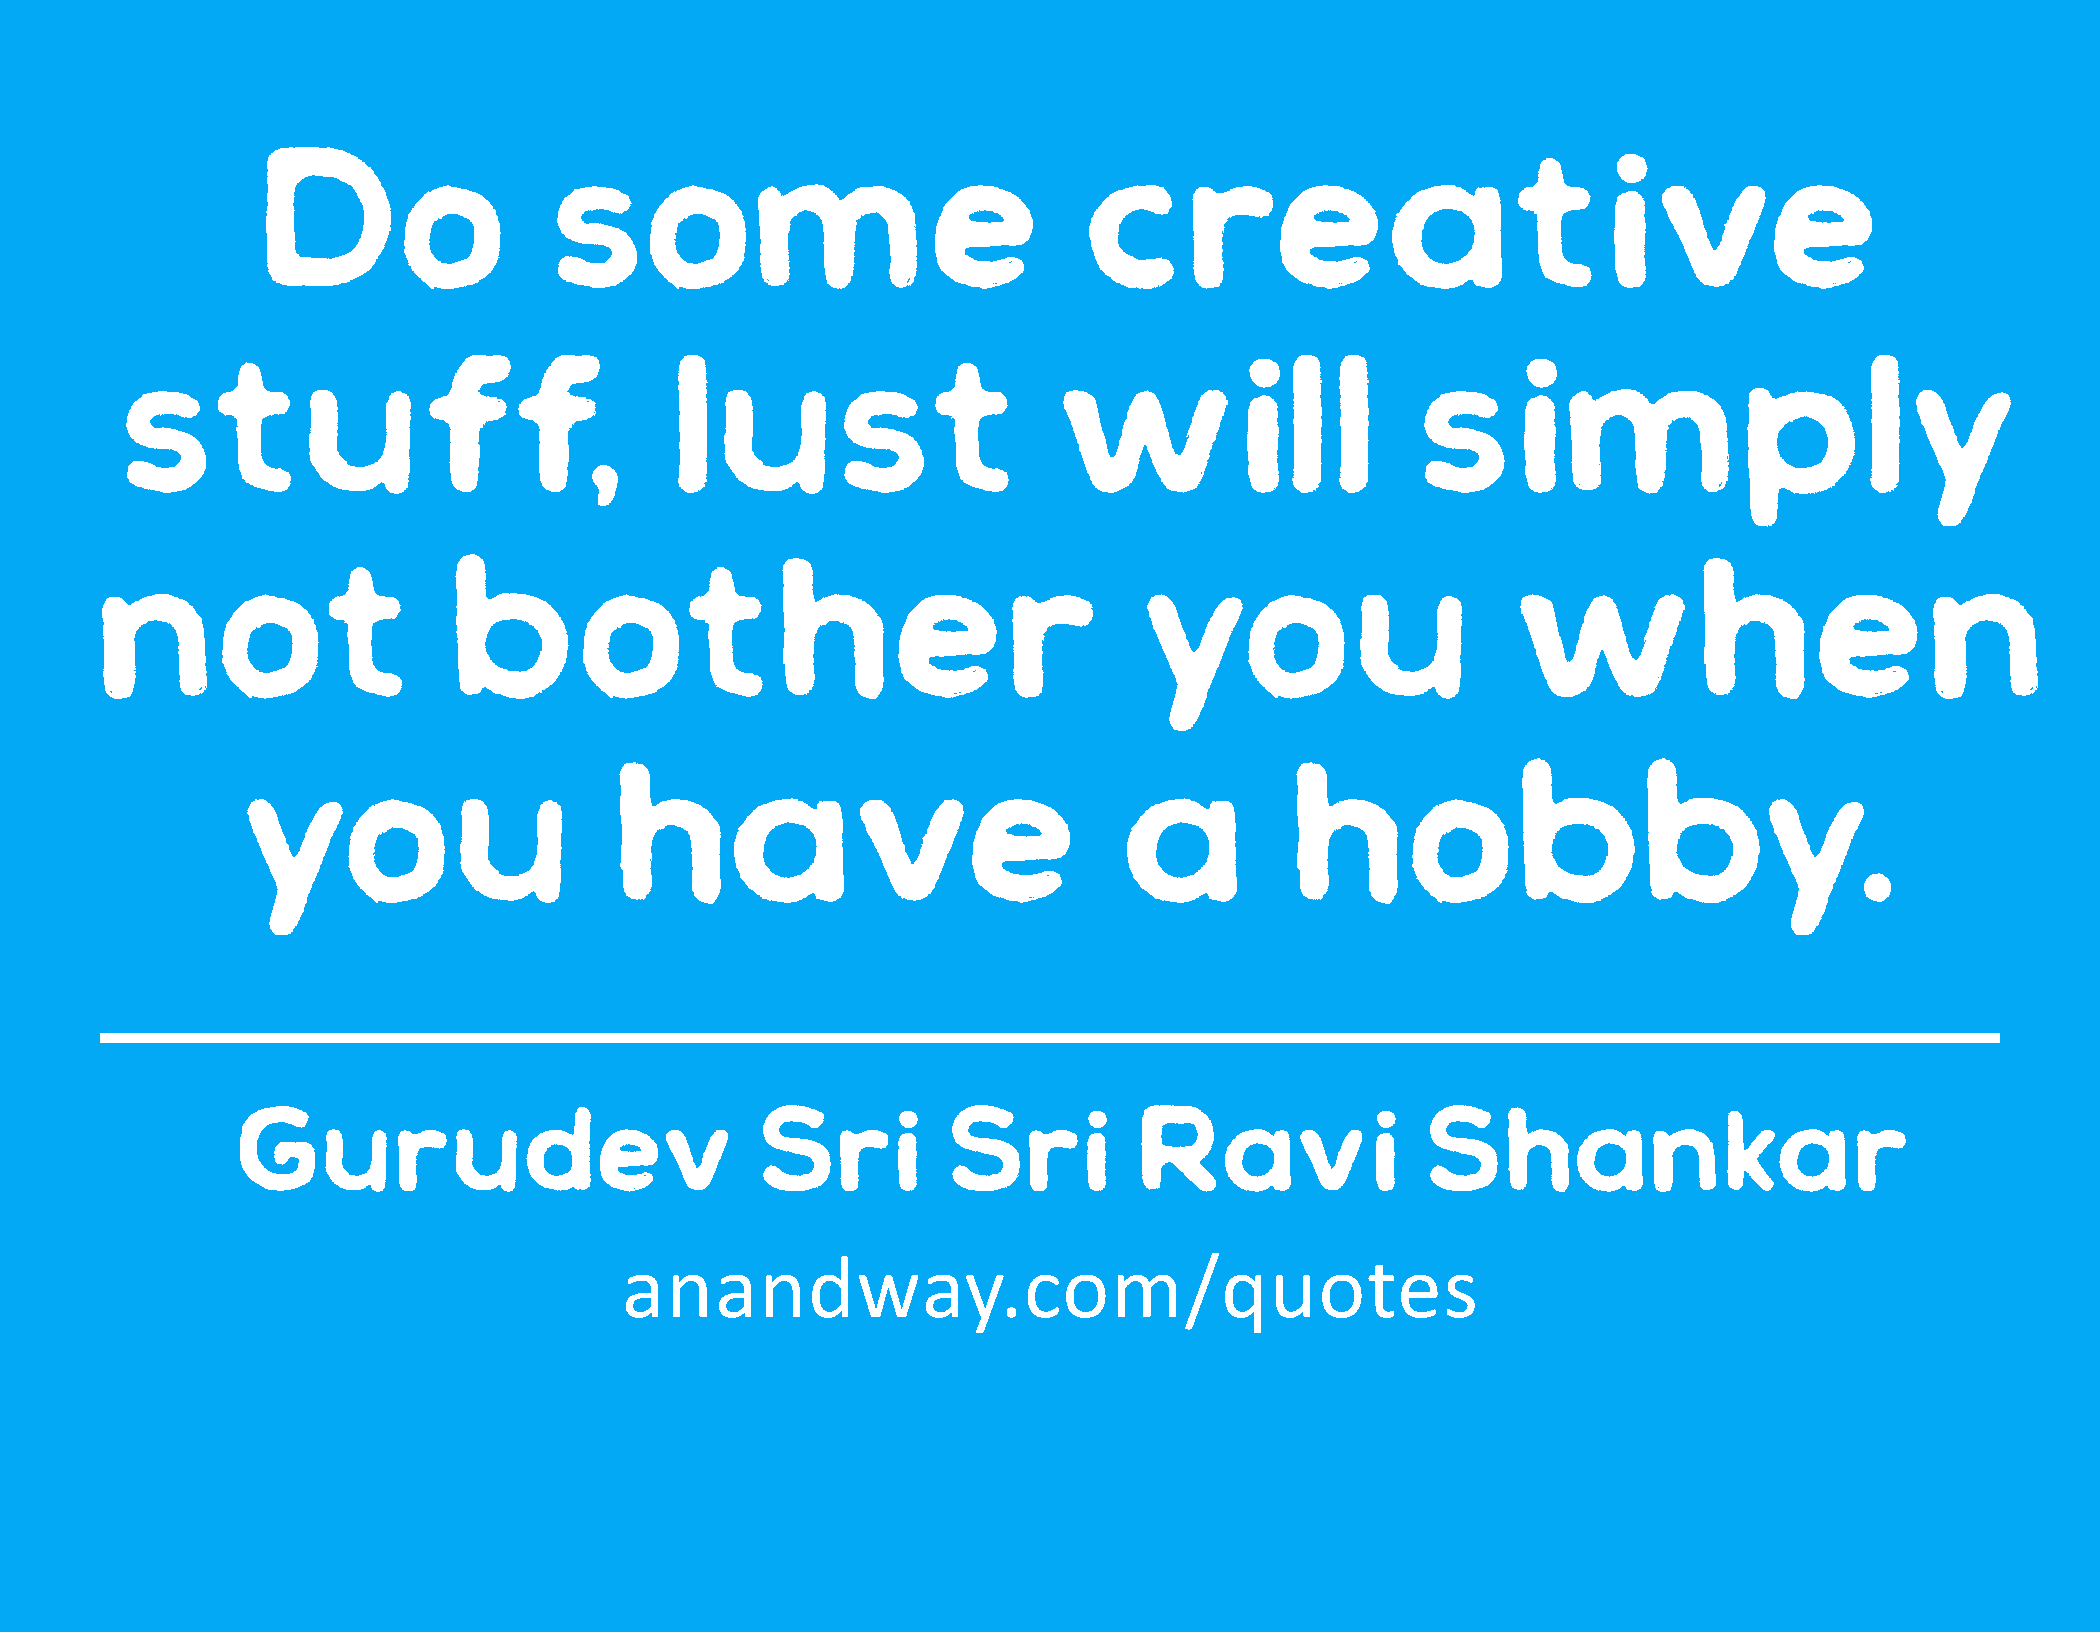 Do some creative stuff, lust will simply not bother you when you have a hobby. 
 -Gurudev Sri Sri Ravi Shankar